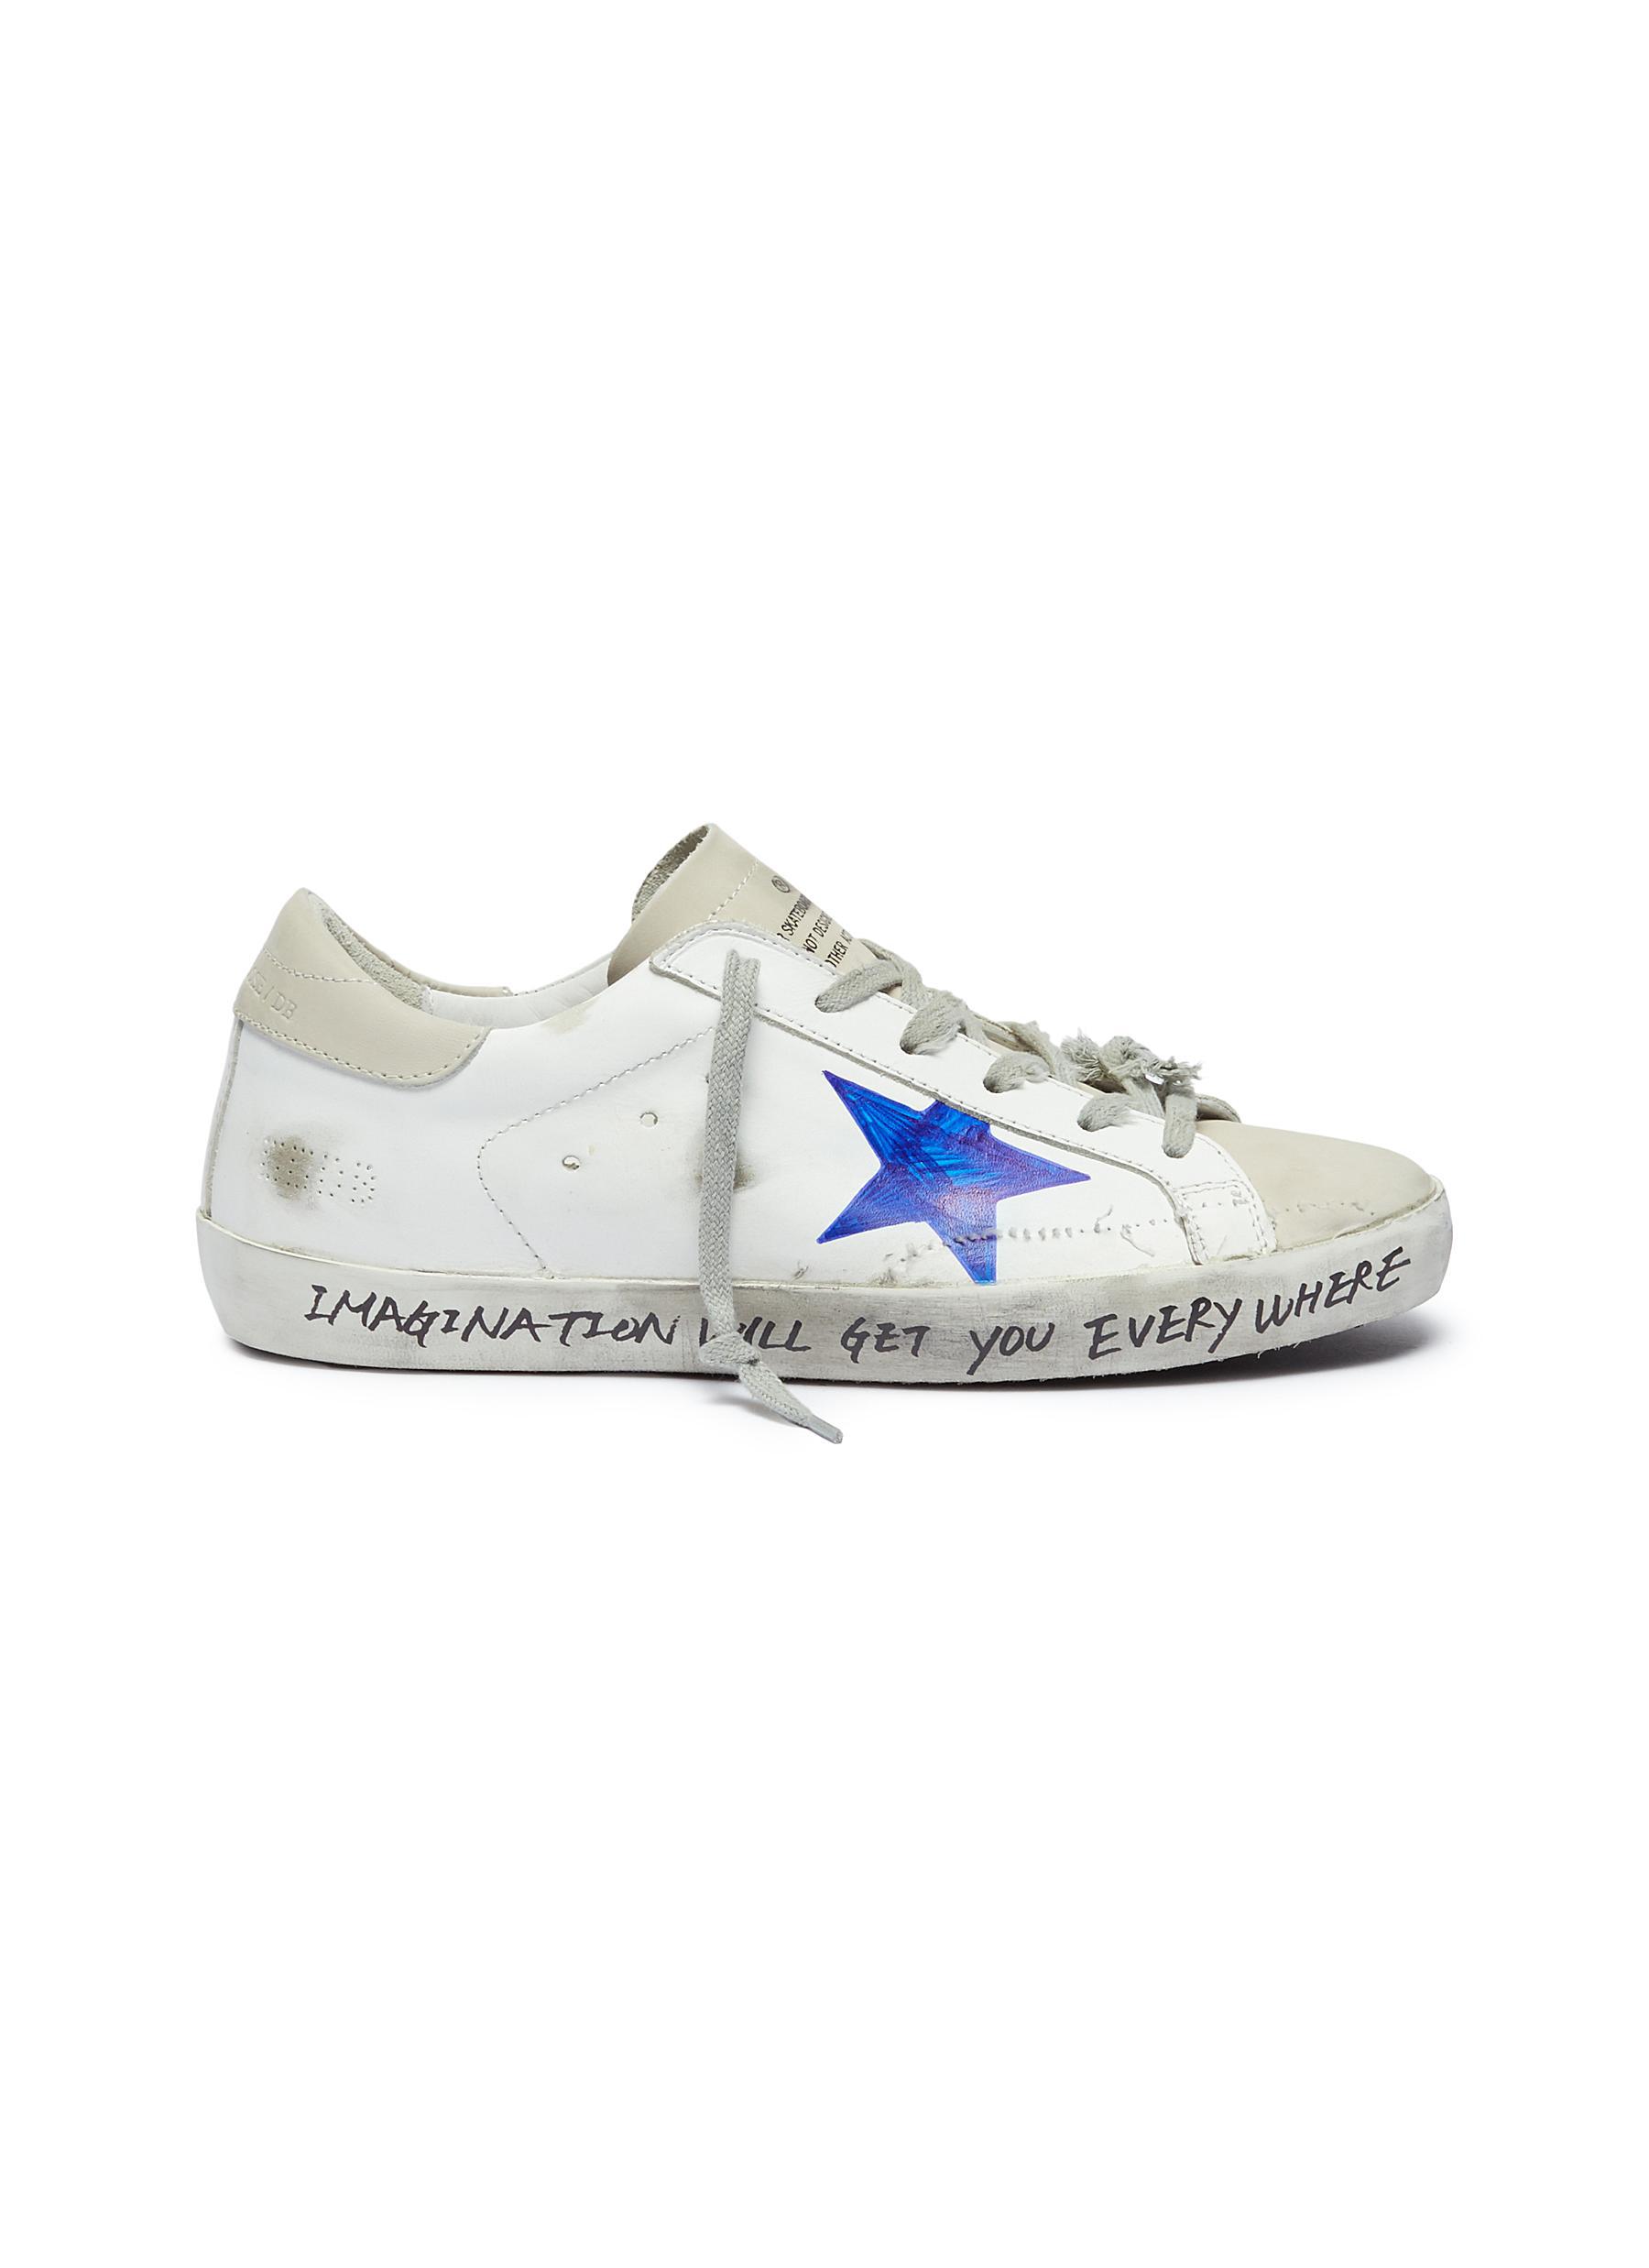 imagination will get you everywhere golden goose